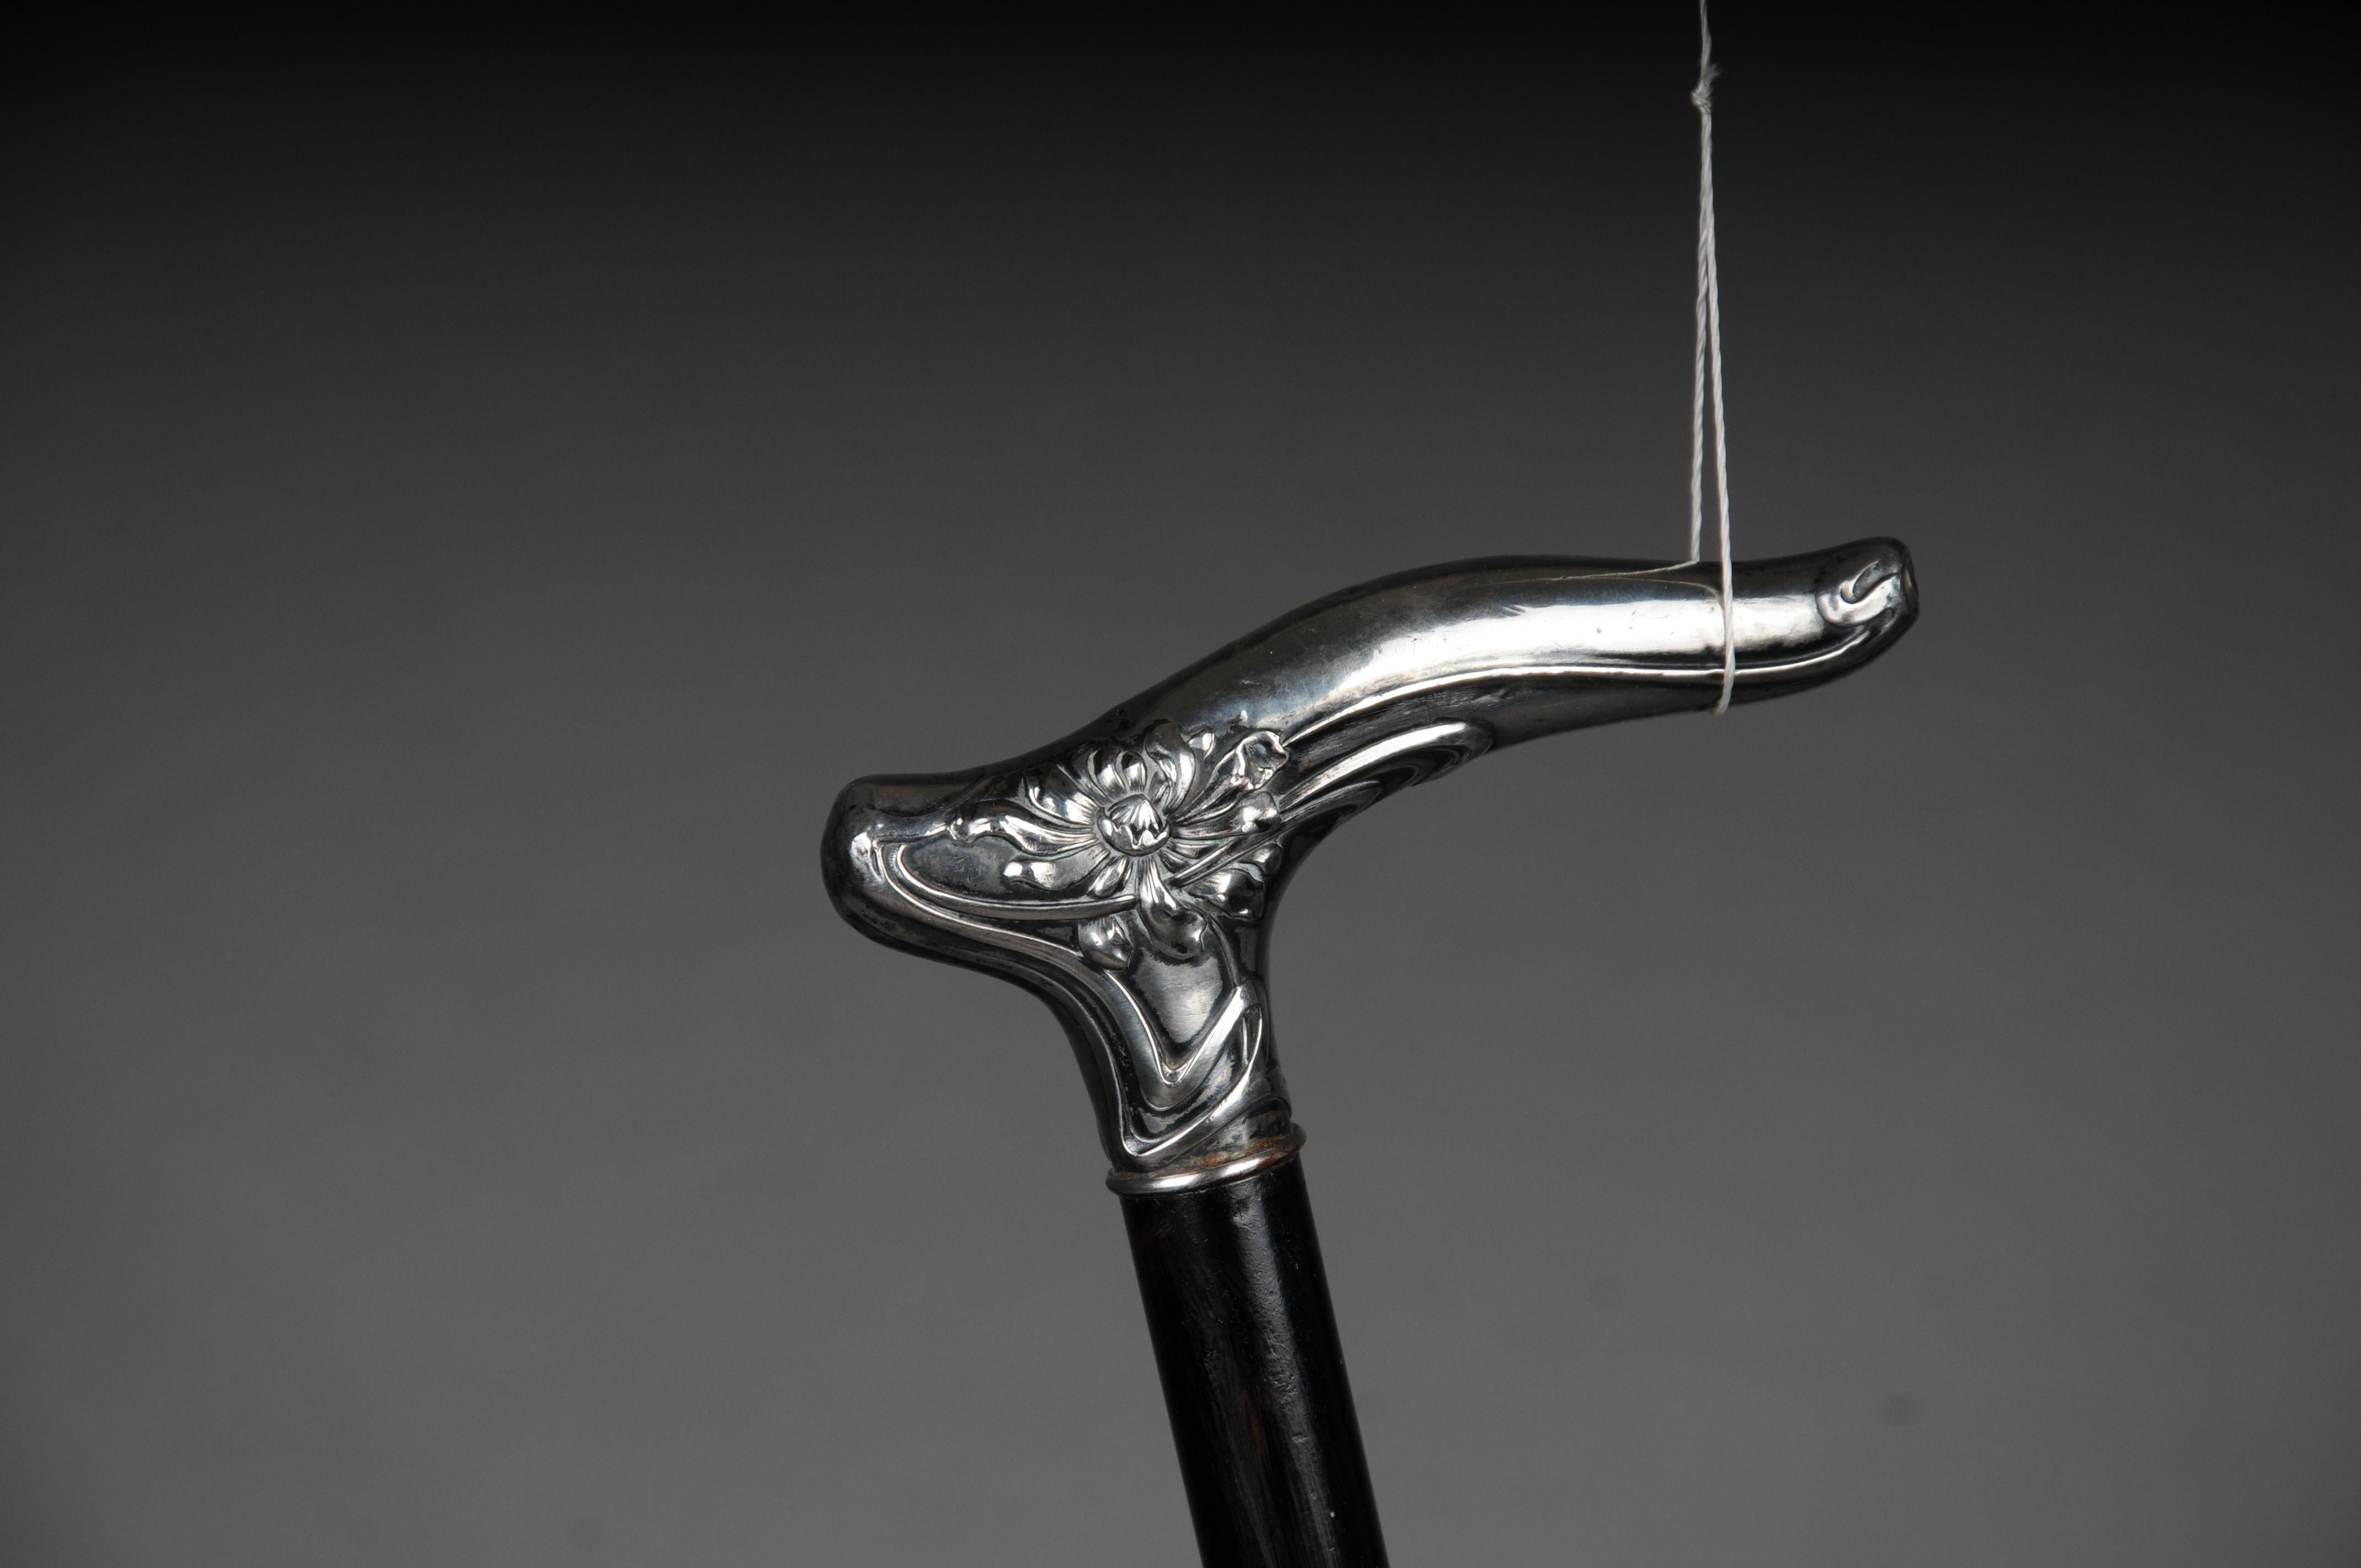 Extraordinary walking stick with beautiful Art Nouveau handle in 800 silver
around 1900
Floral Art Nouveau handle slightly tarnished silver.